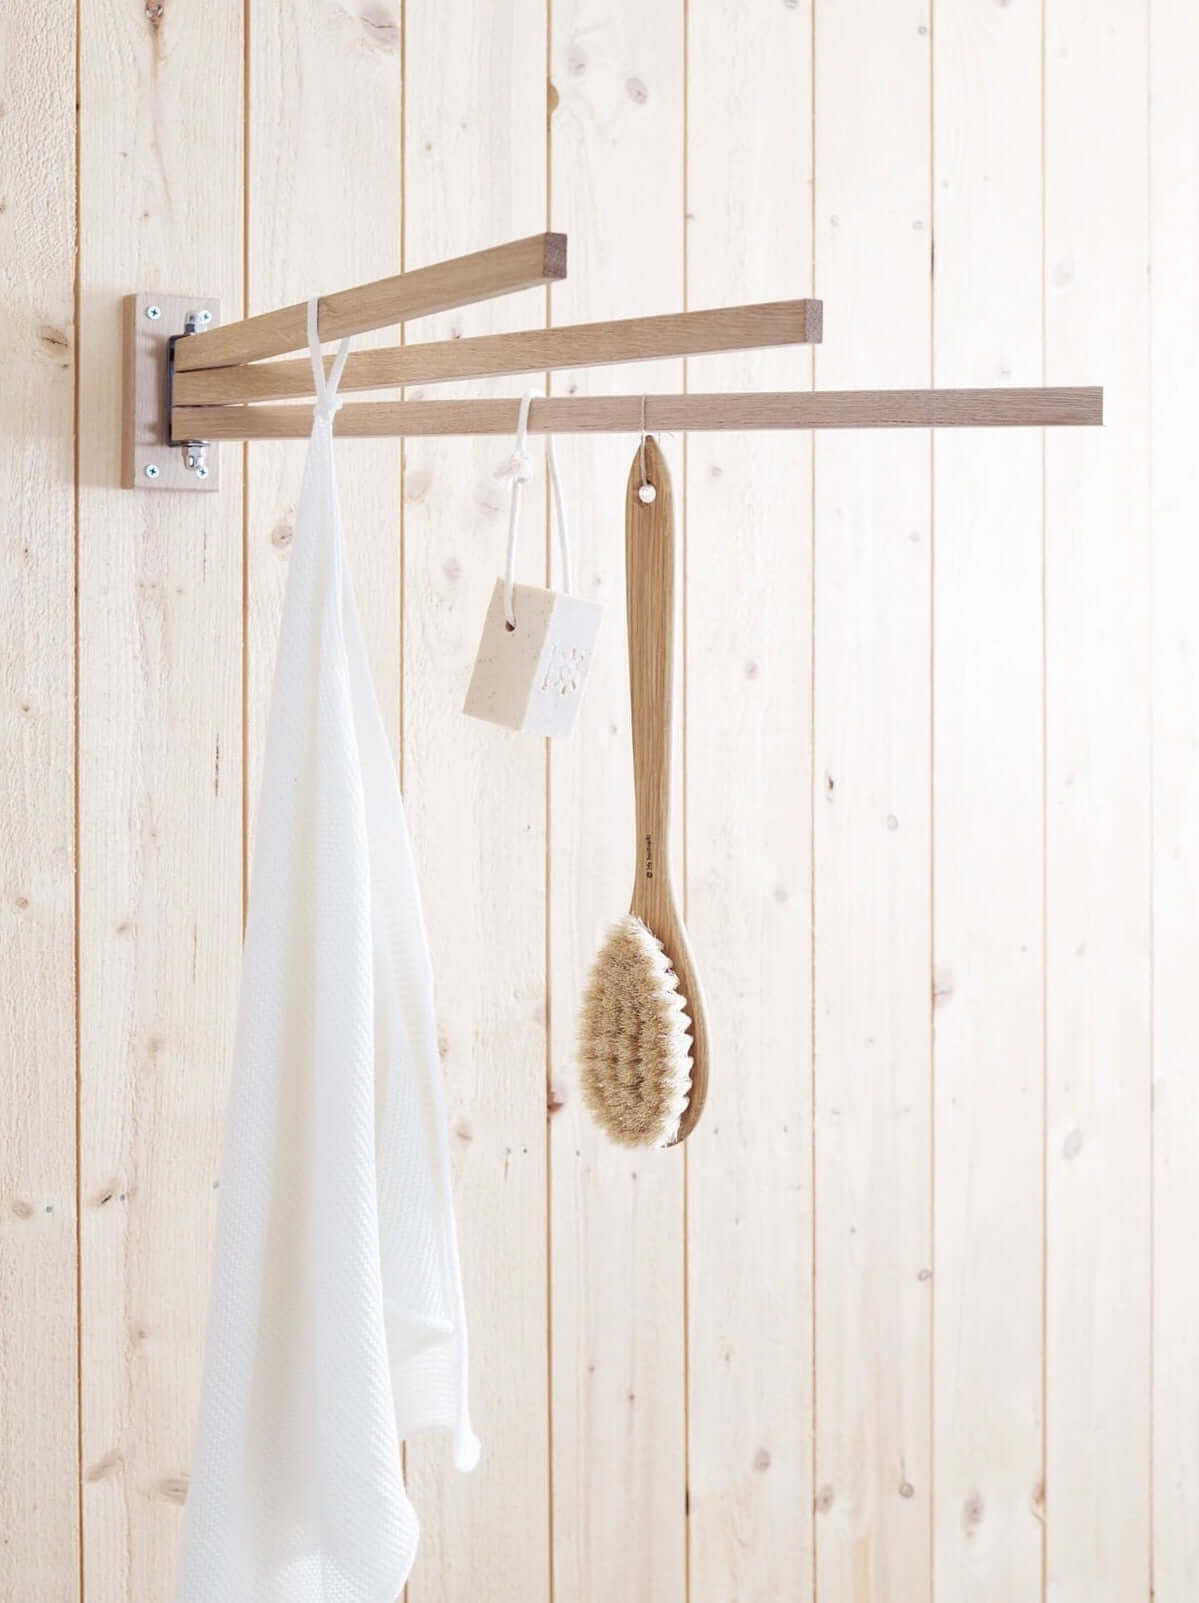 A wooden drying rack with towels and brushes hanging on it.